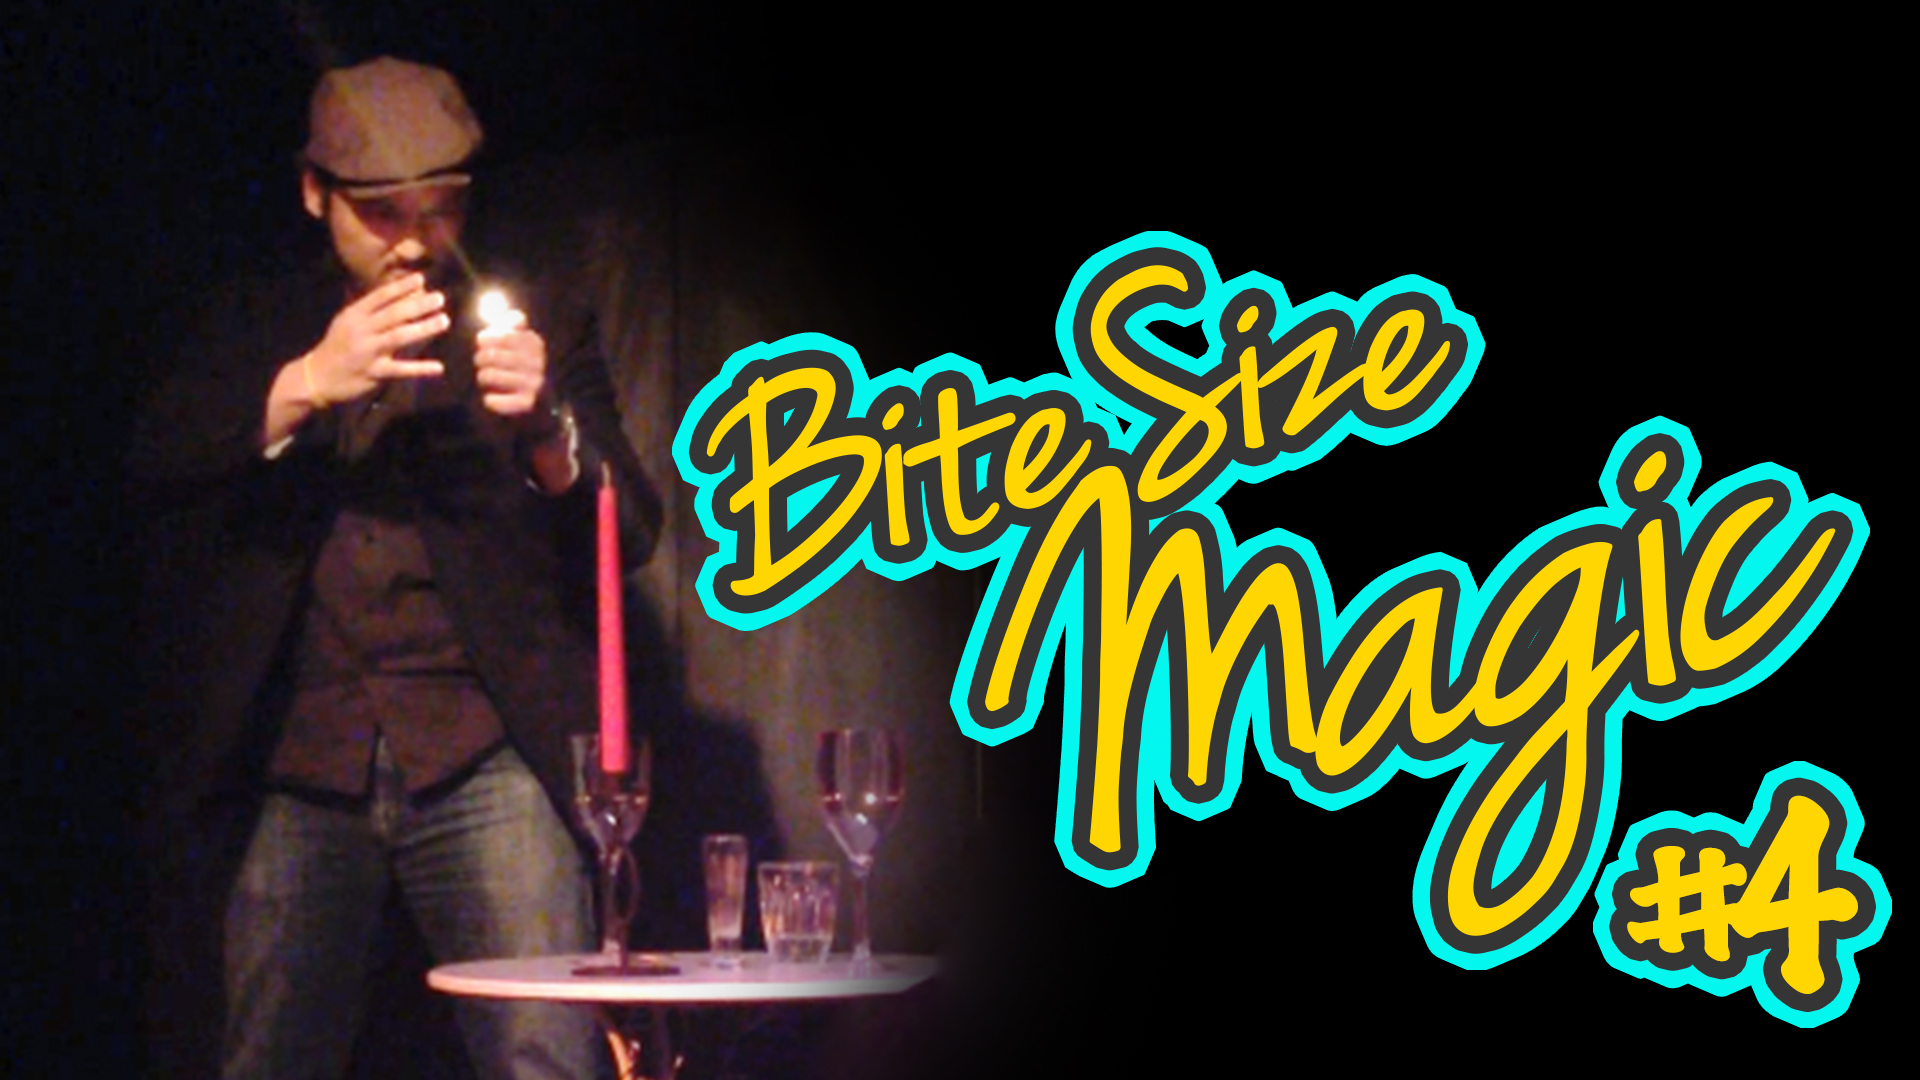 Bite Size Magic – A Date with a Magician – Stage Magic Illusions